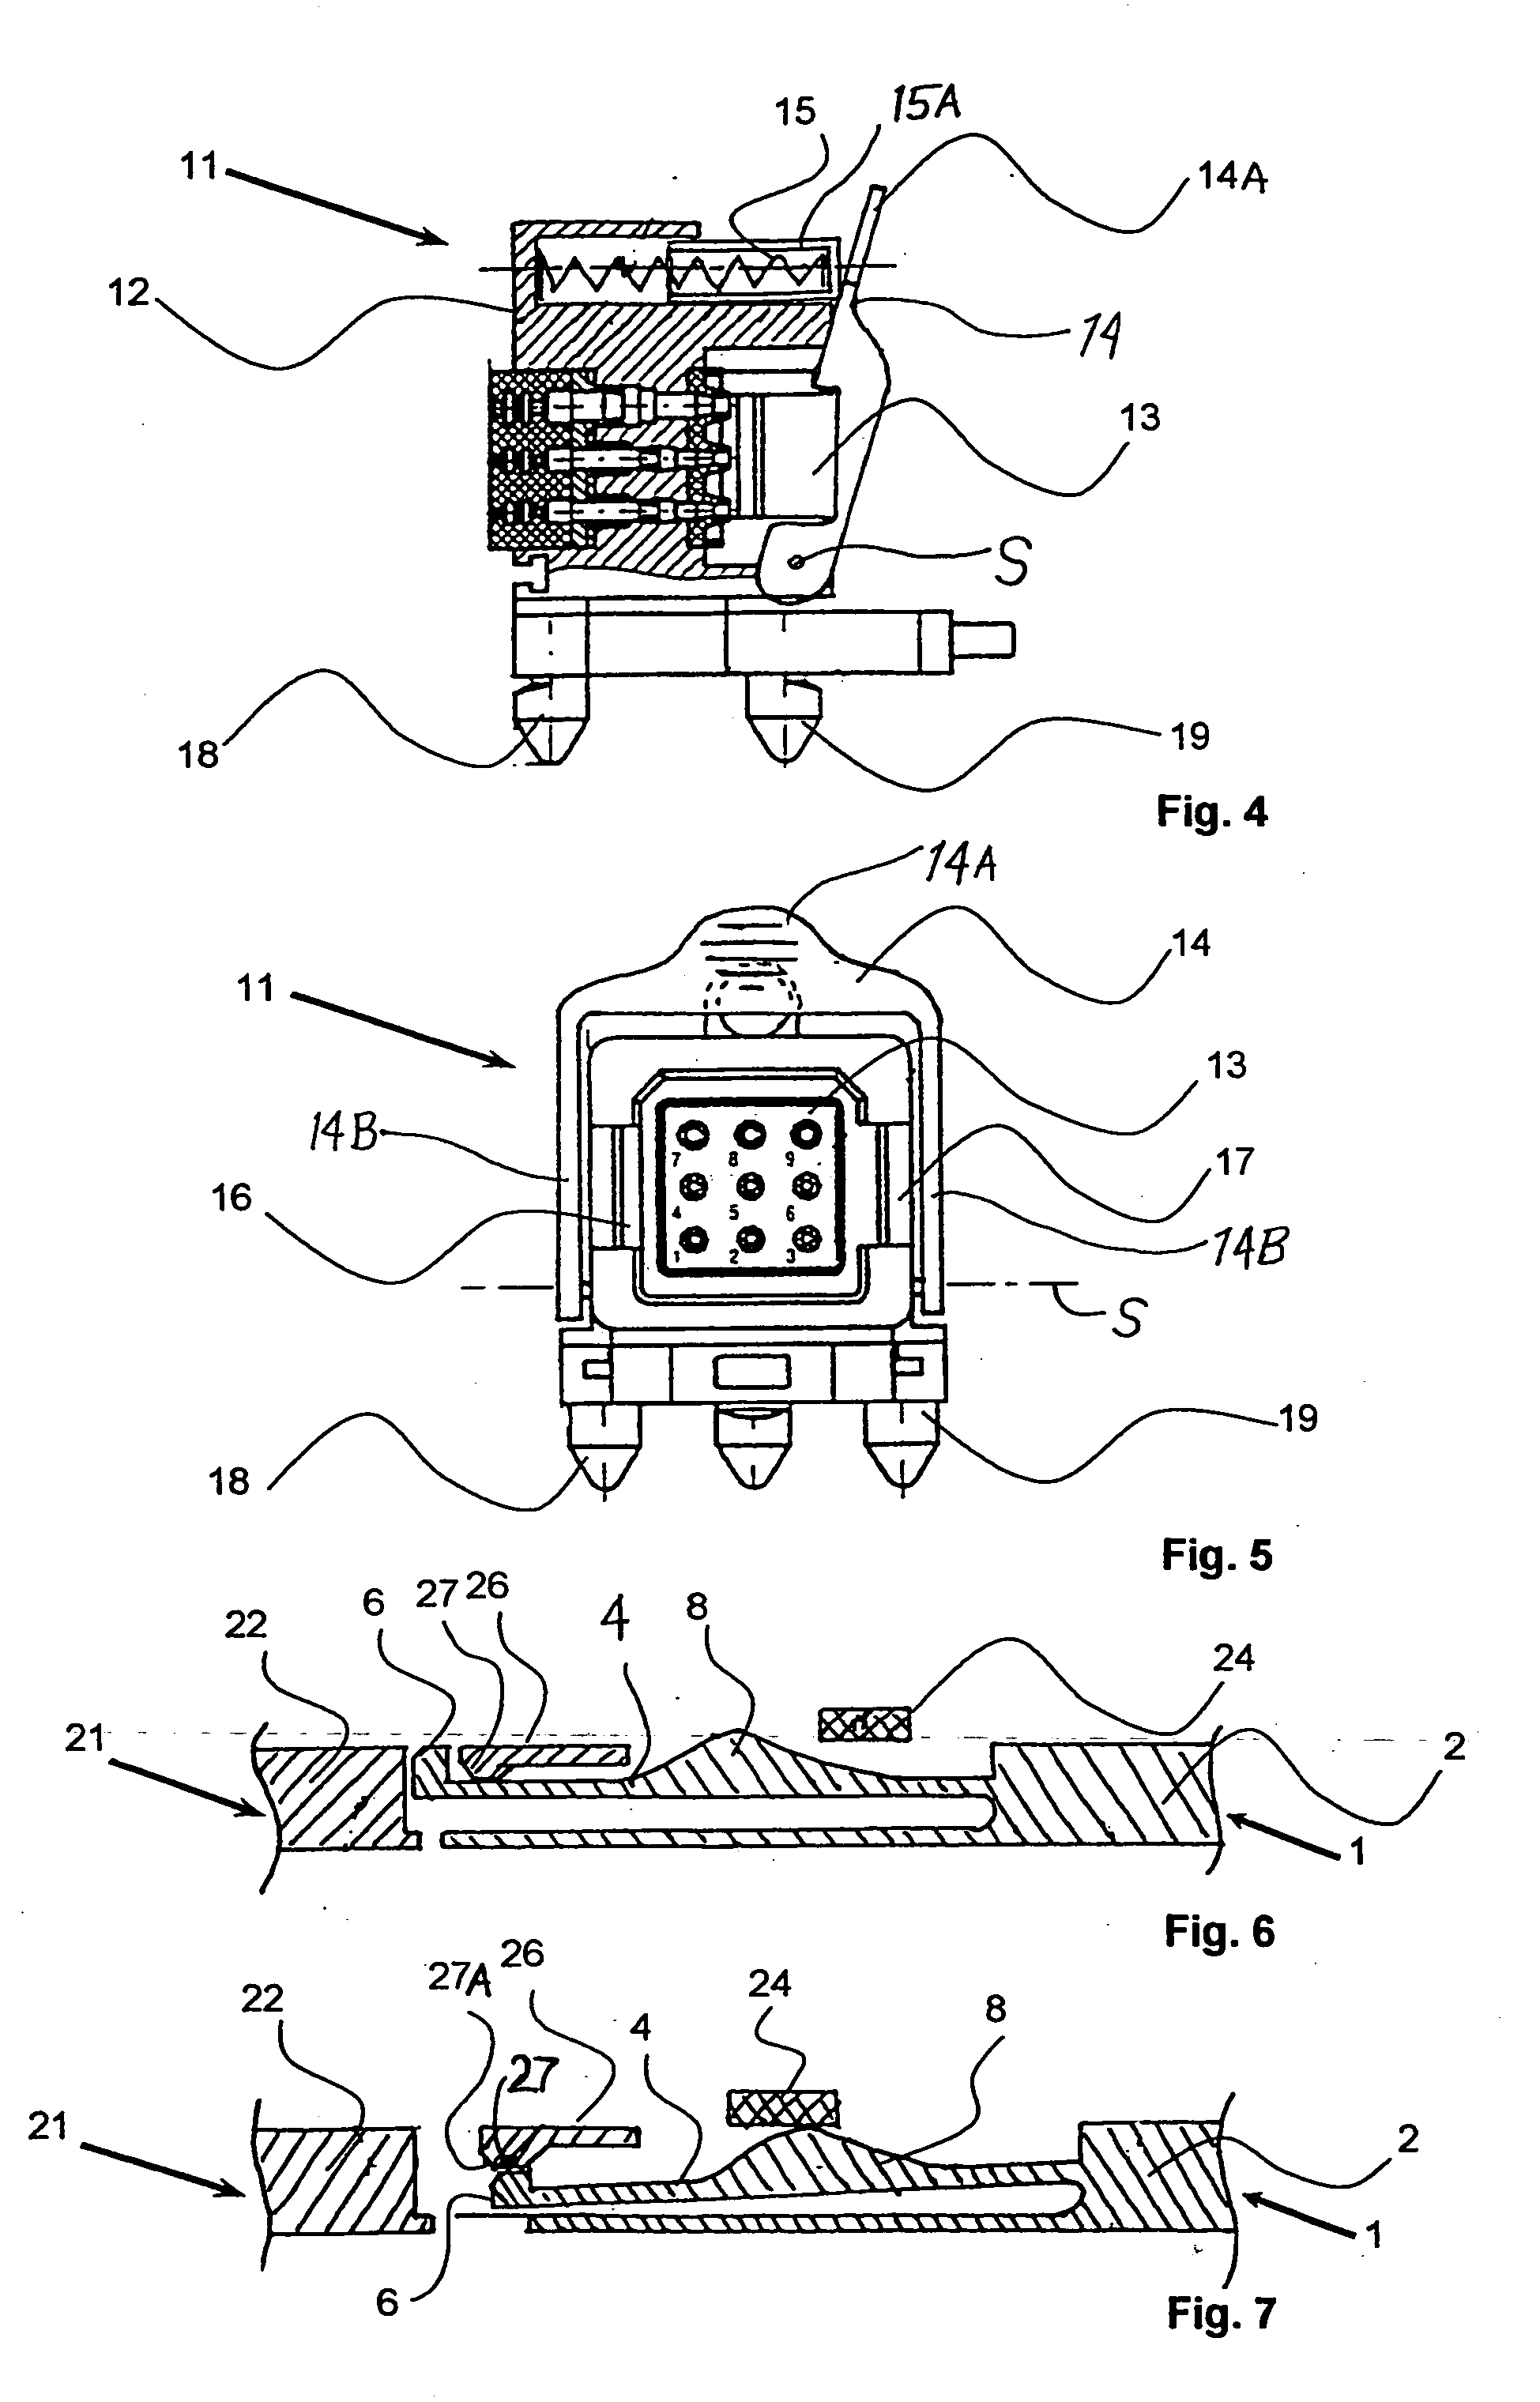 Lockable electrical plug and socket connection